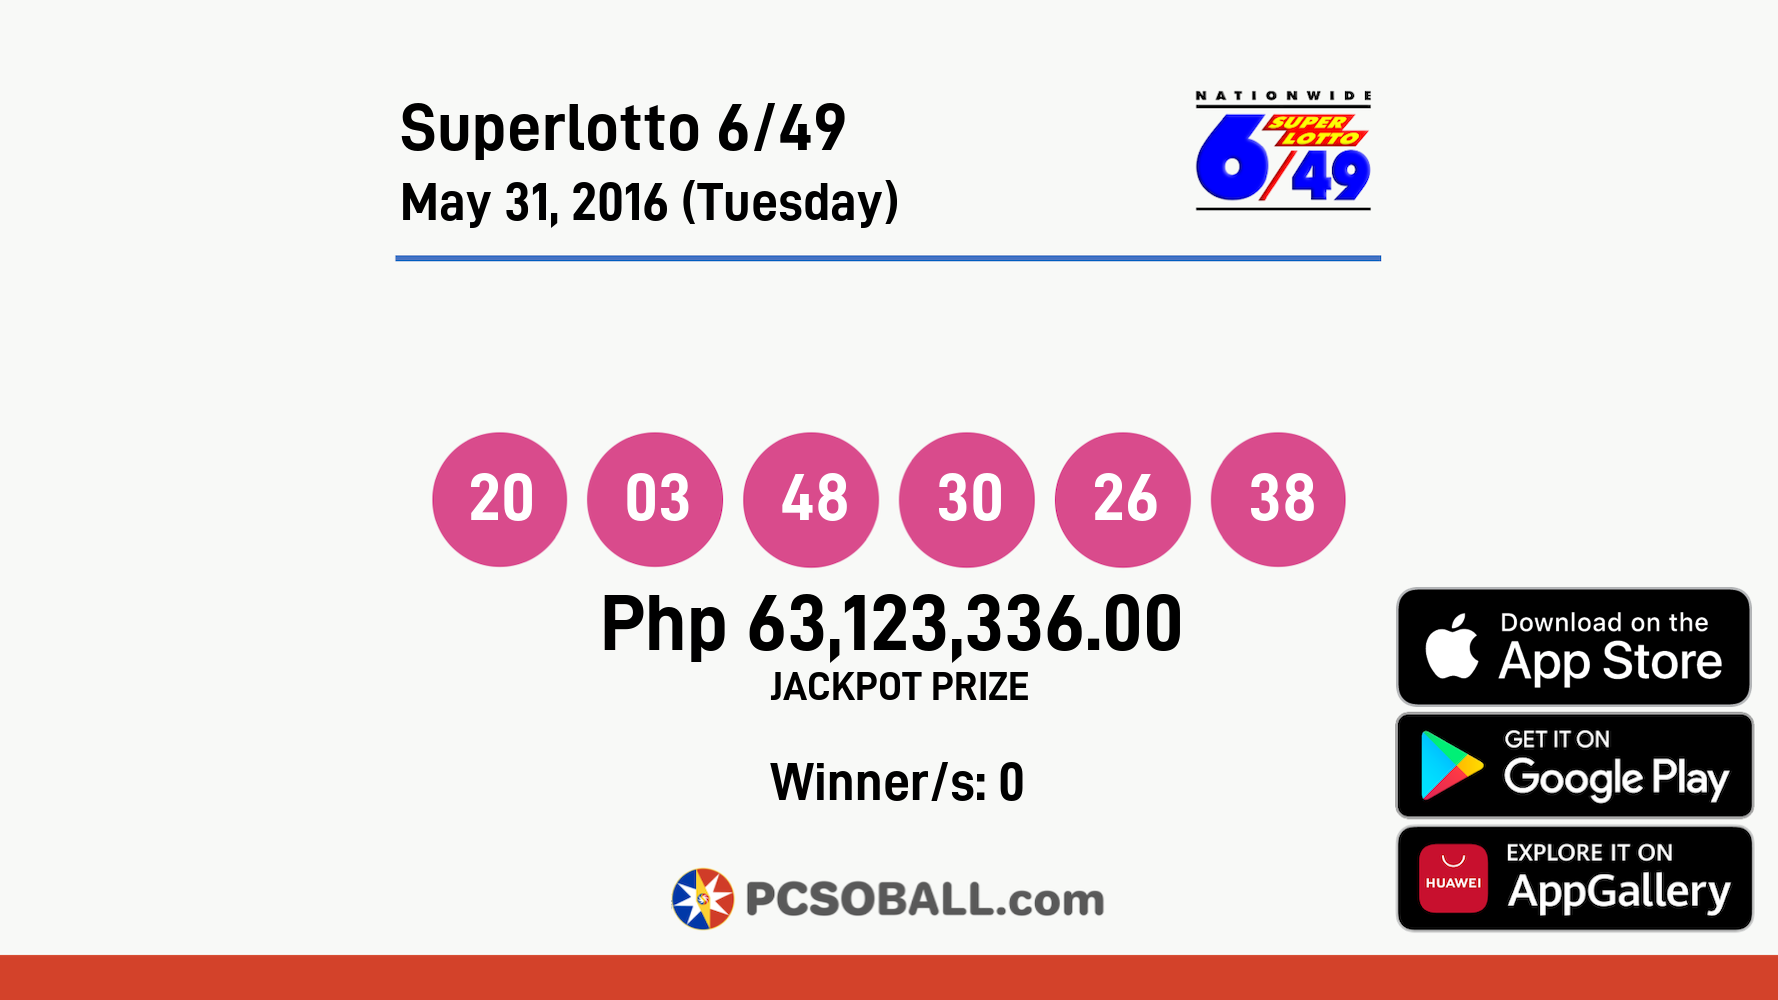 Superlotto 6/49 May 31, 2016 (Tuesday) Result